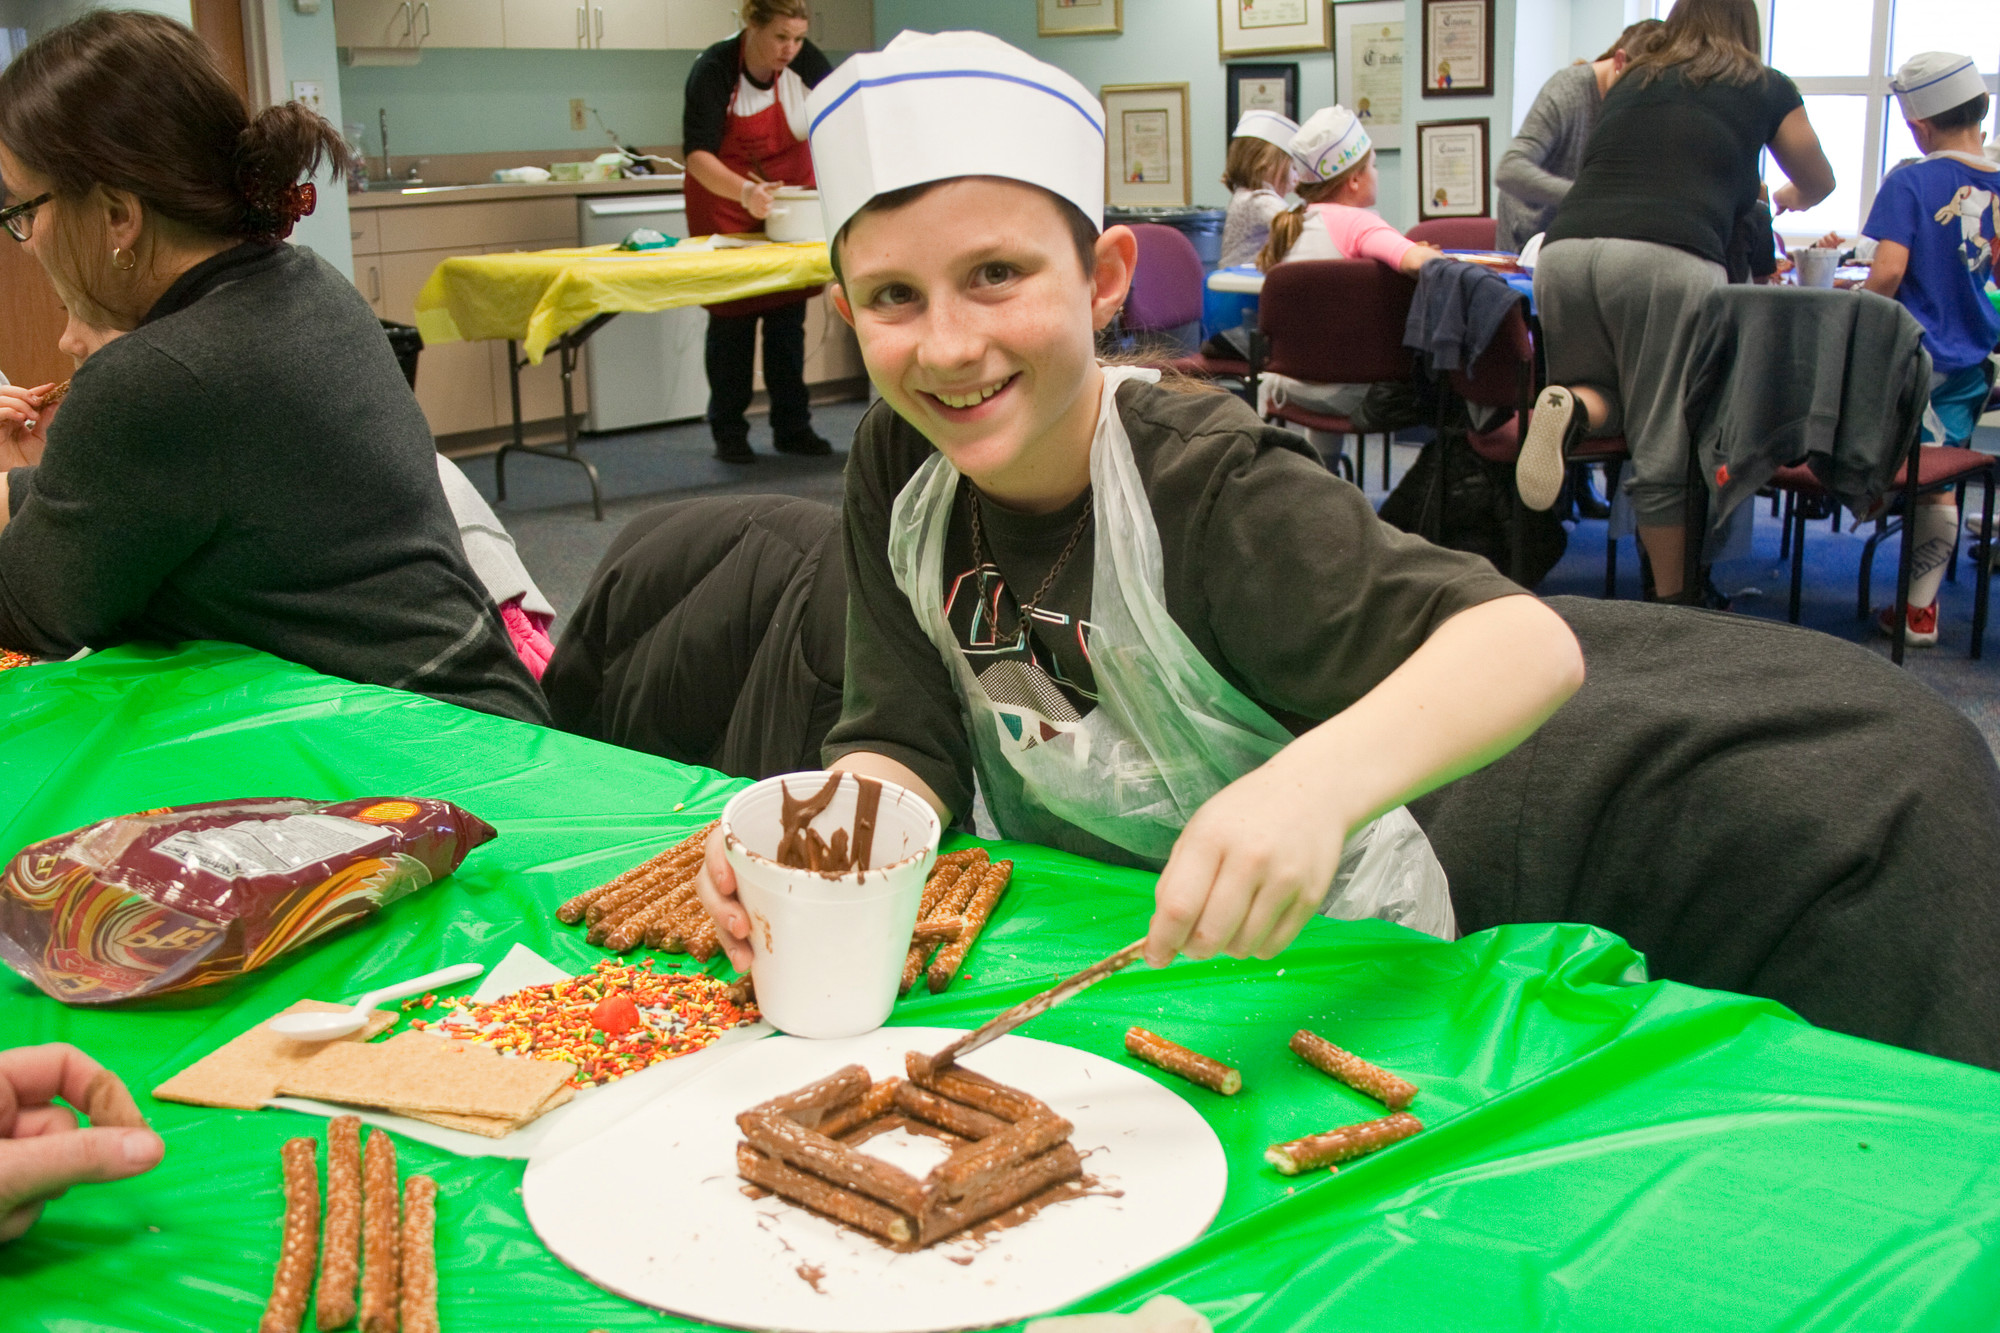 Shane Mulvey, 10, is as excited about making a log cabin as he is about eating it!